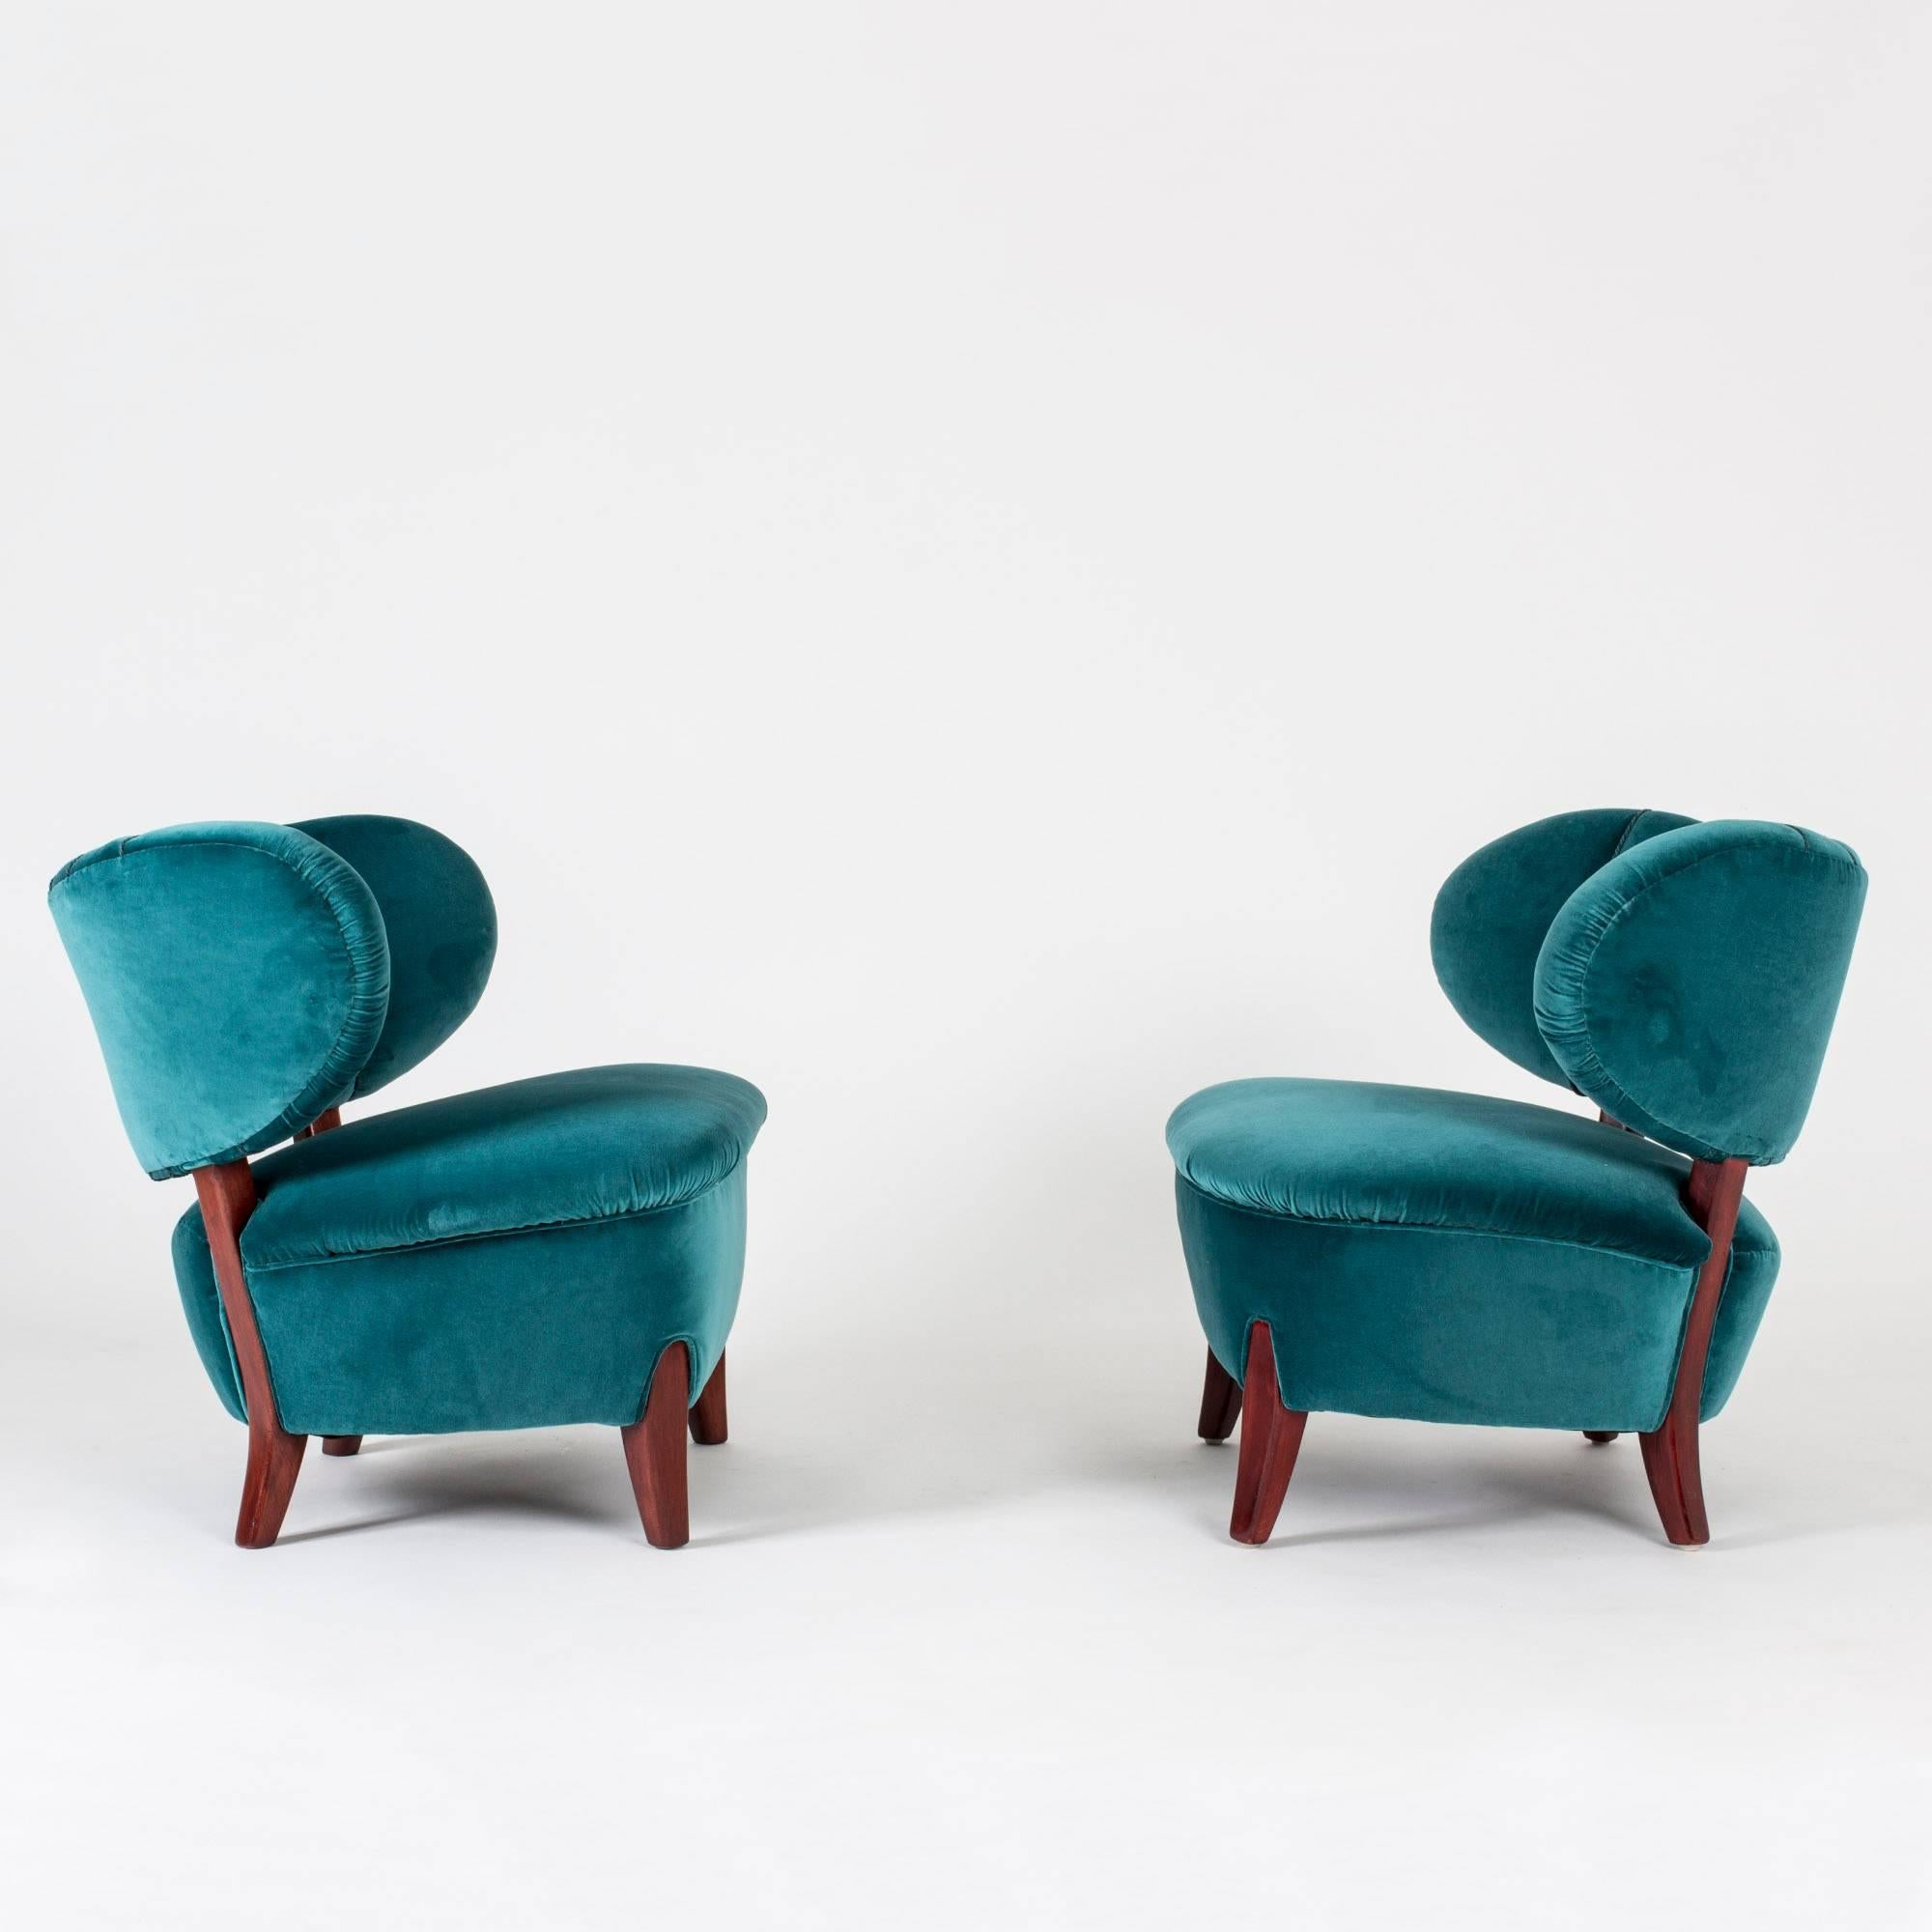 Pair of beautiful lounge chairs by Otto Schulz, upholstered with petrol blue velvet and decorated with braided ropes in the same color on the backrest. Wooden legs stained rich reddish brown.